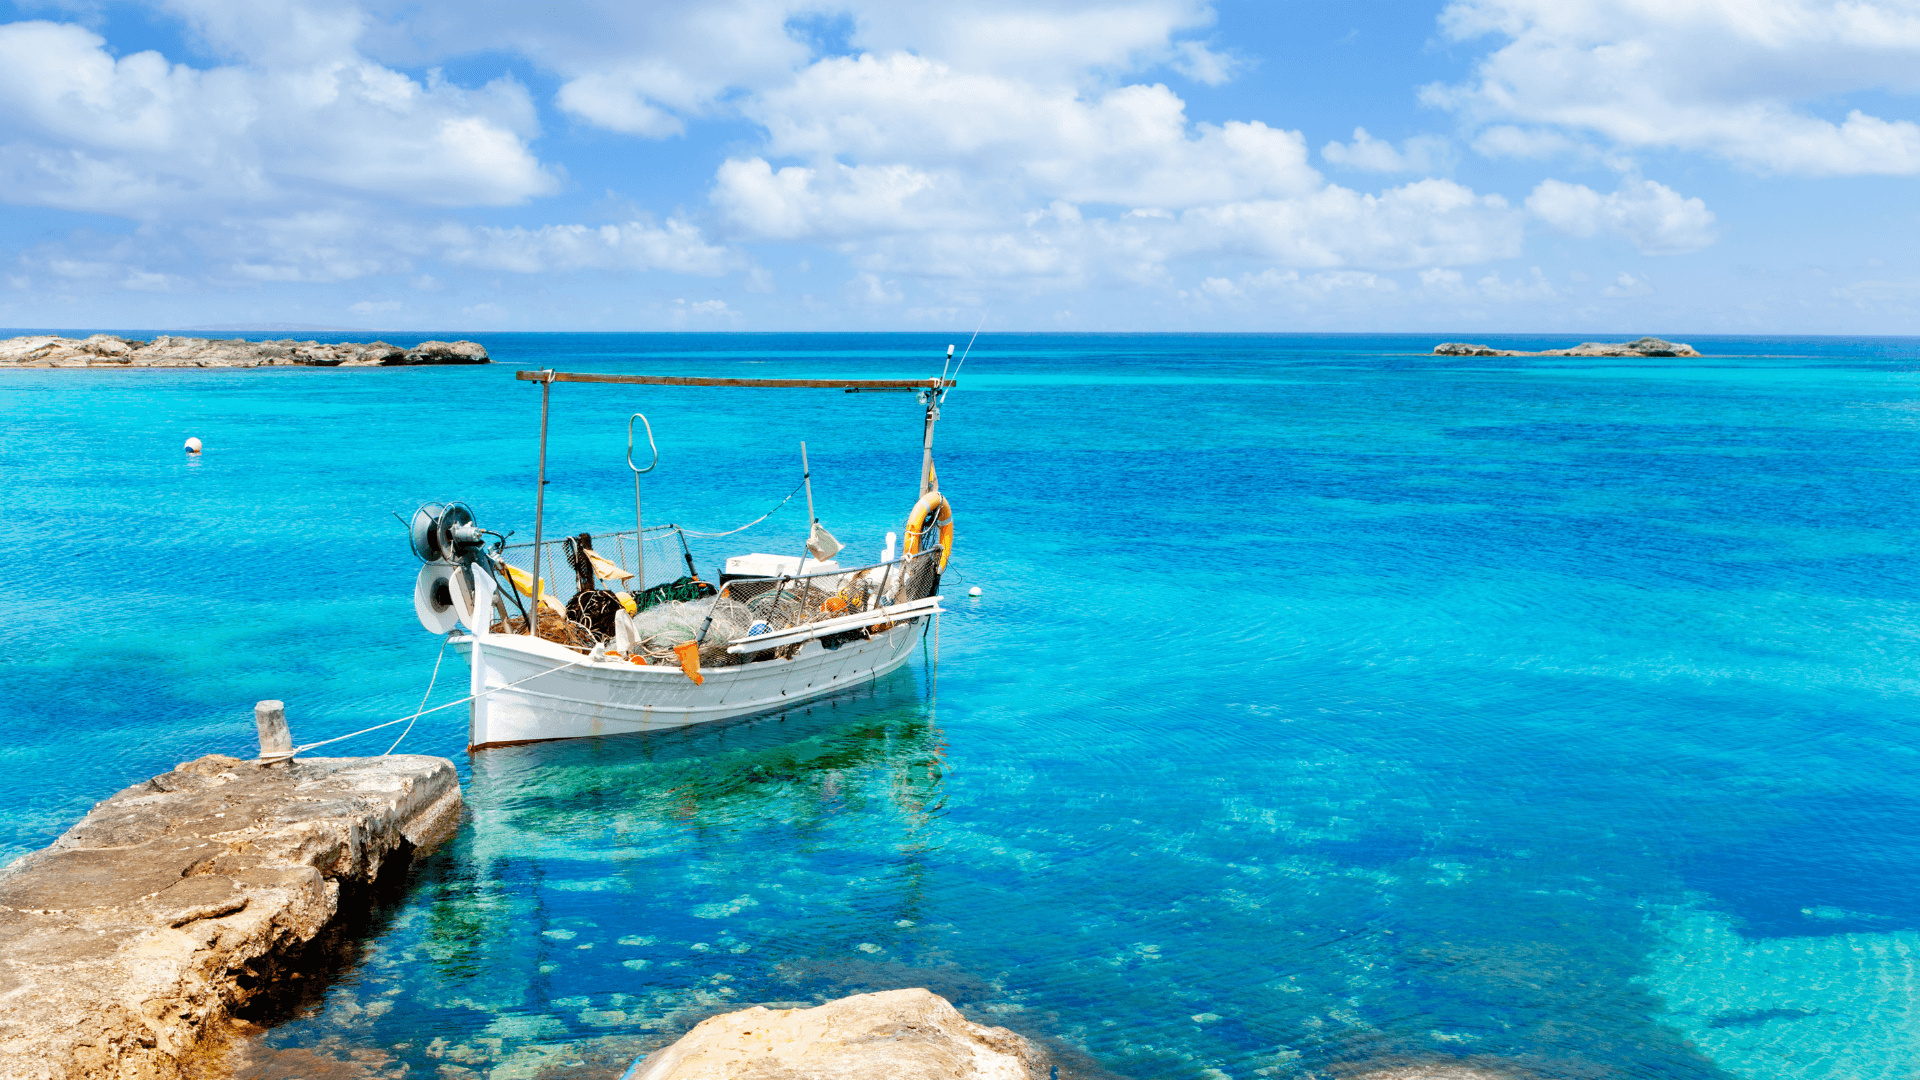 Ferry to Formentera, Route information, Ferry companies, 1920x1080 Full HD Desktop